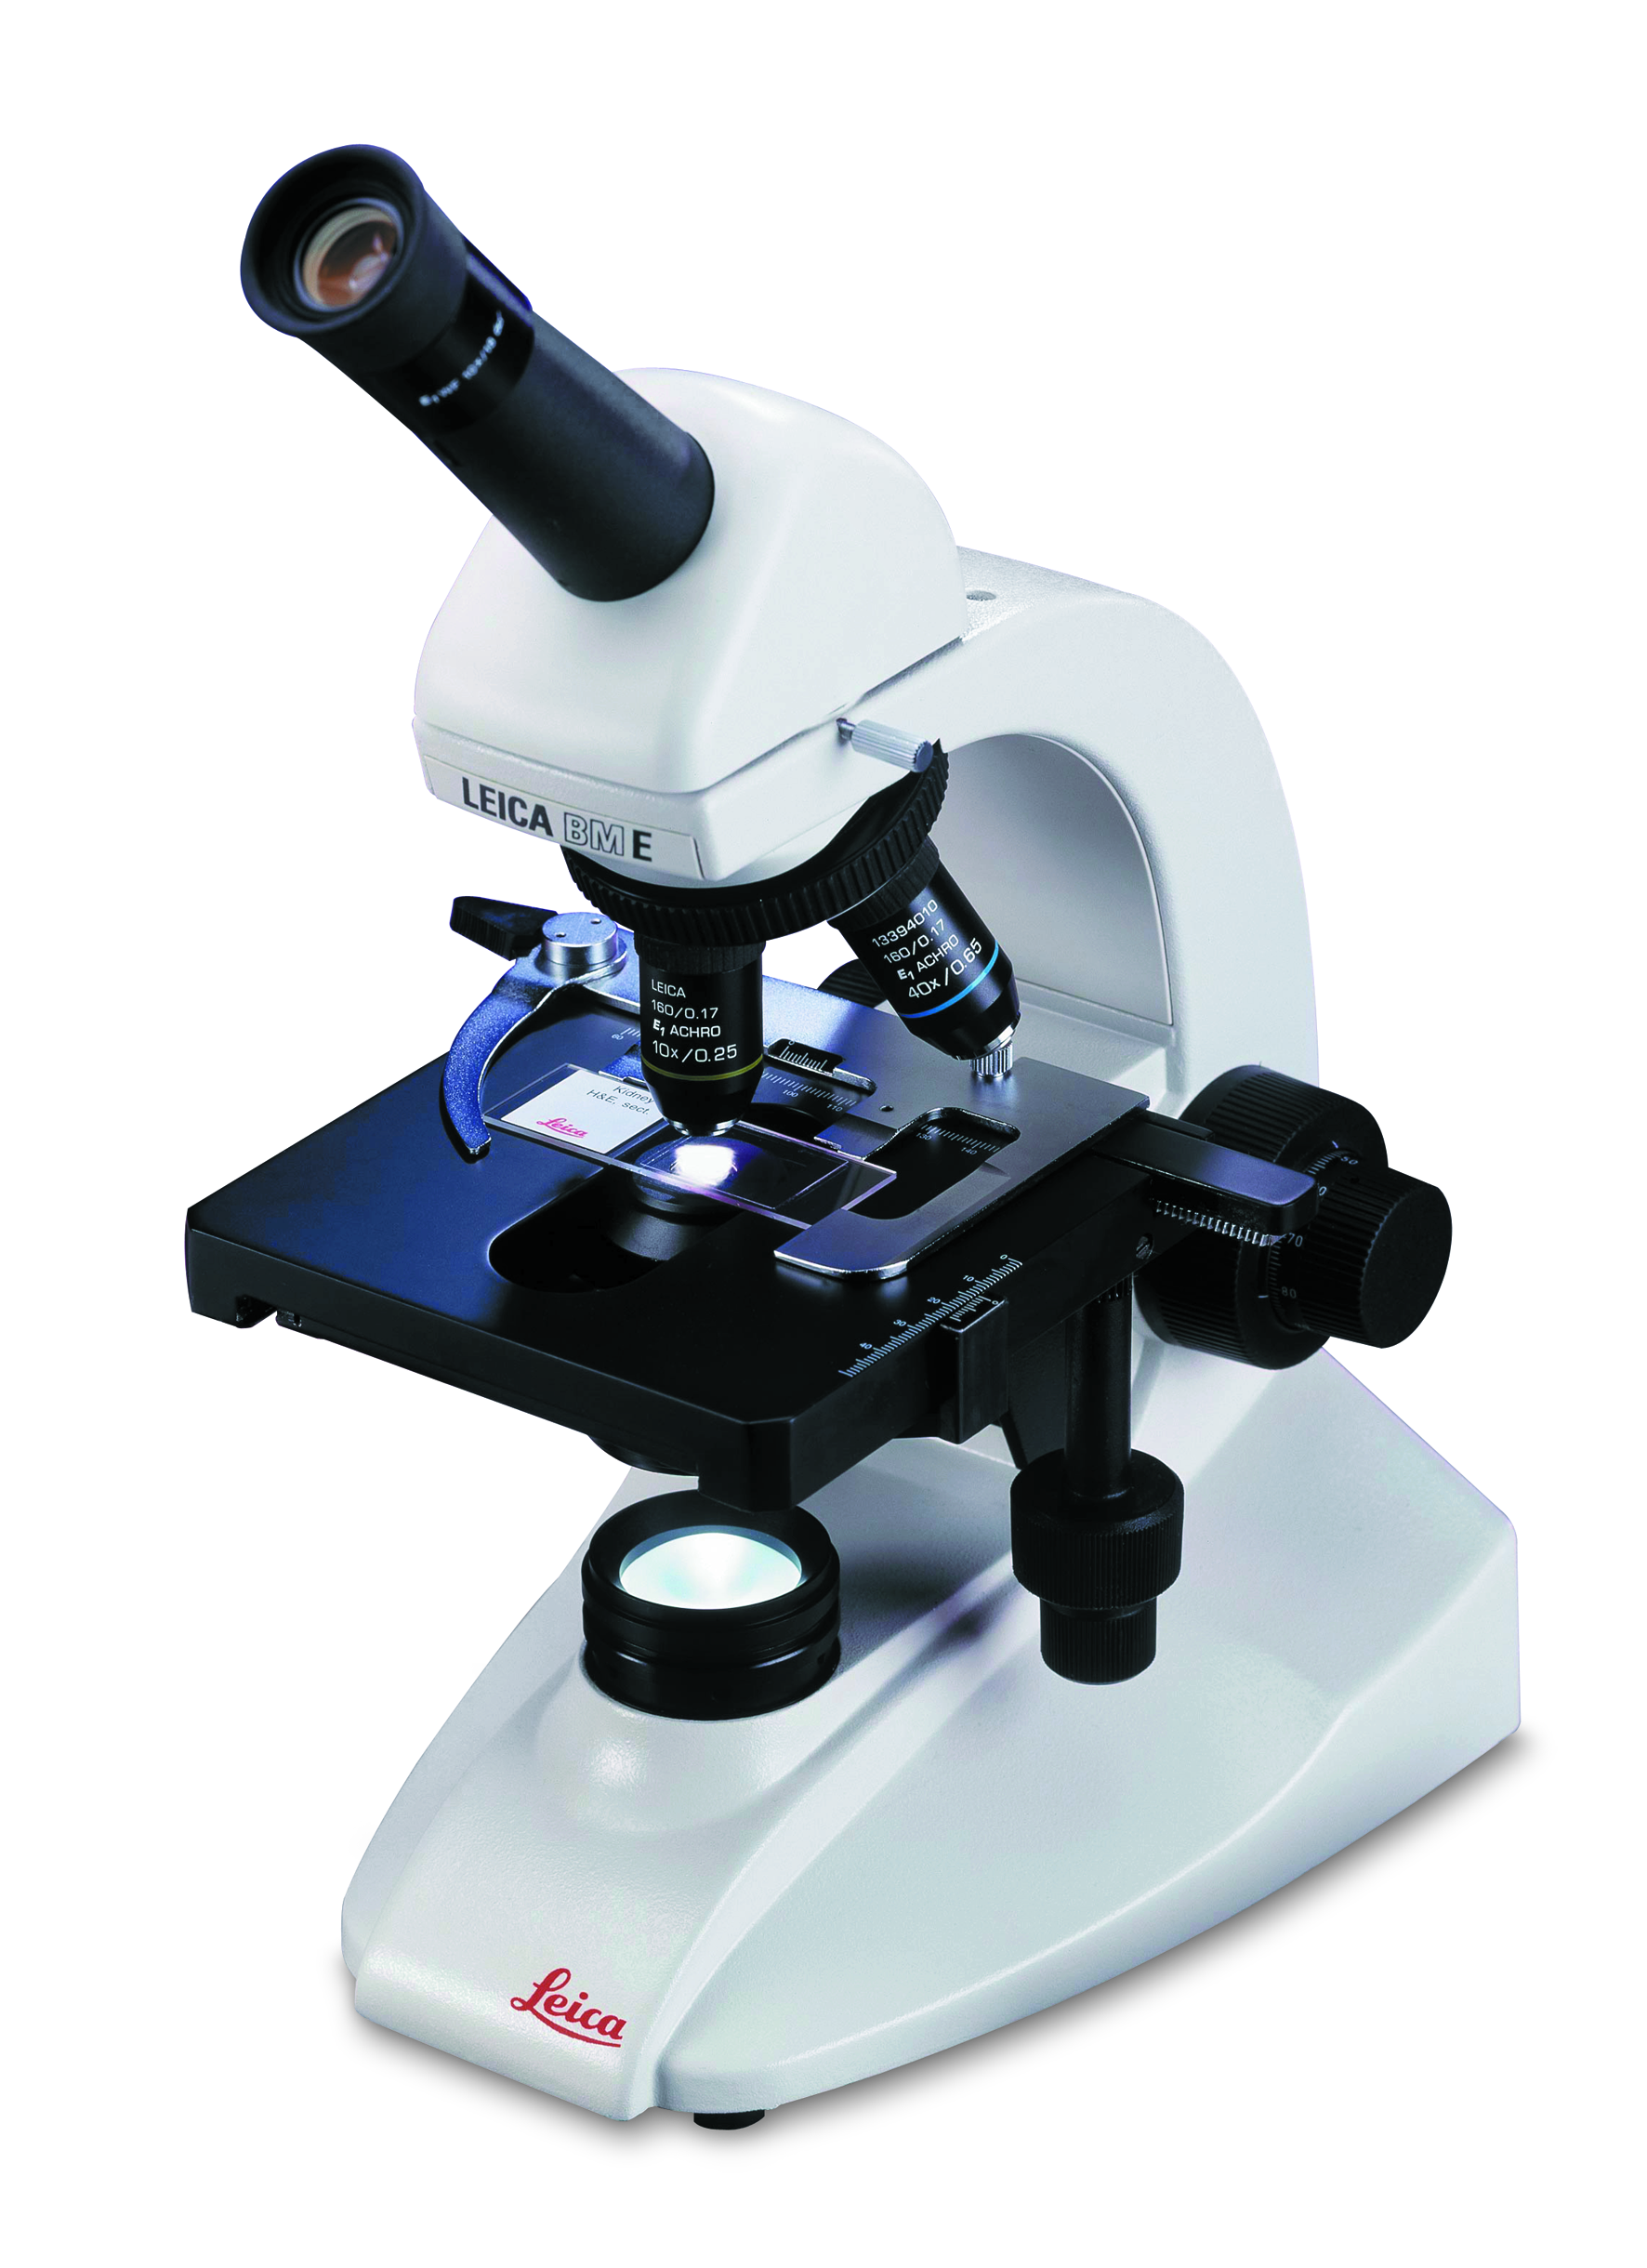 High-quality optics and durability make the Leica BM E a best-in-class educational microscope.